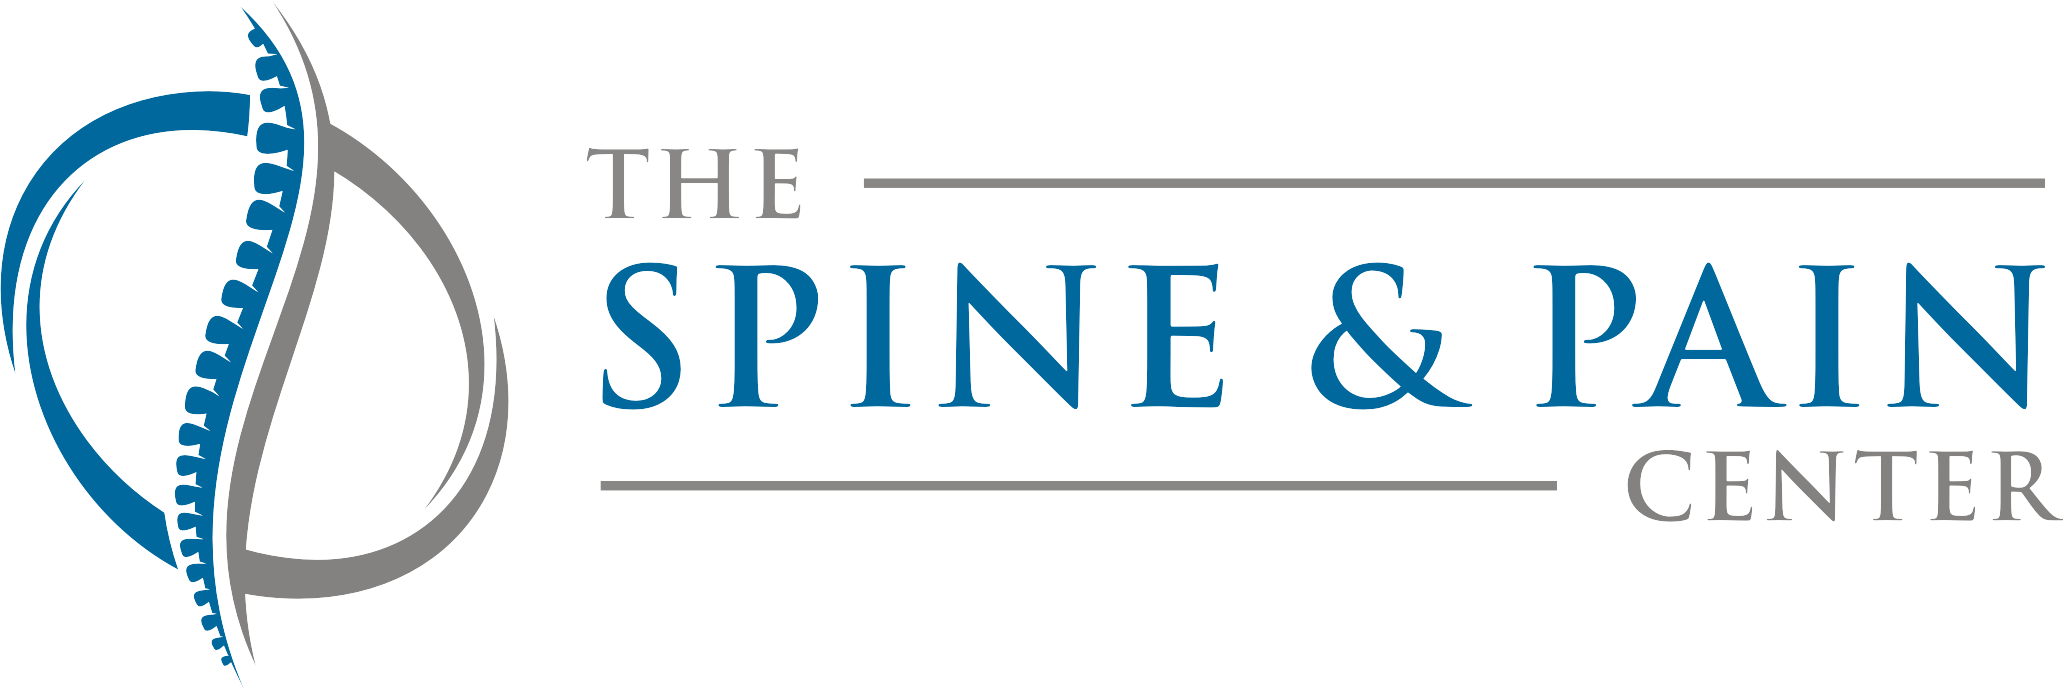 The Spine and Pain Center | Pain Management Physicians | Tulsa, OK